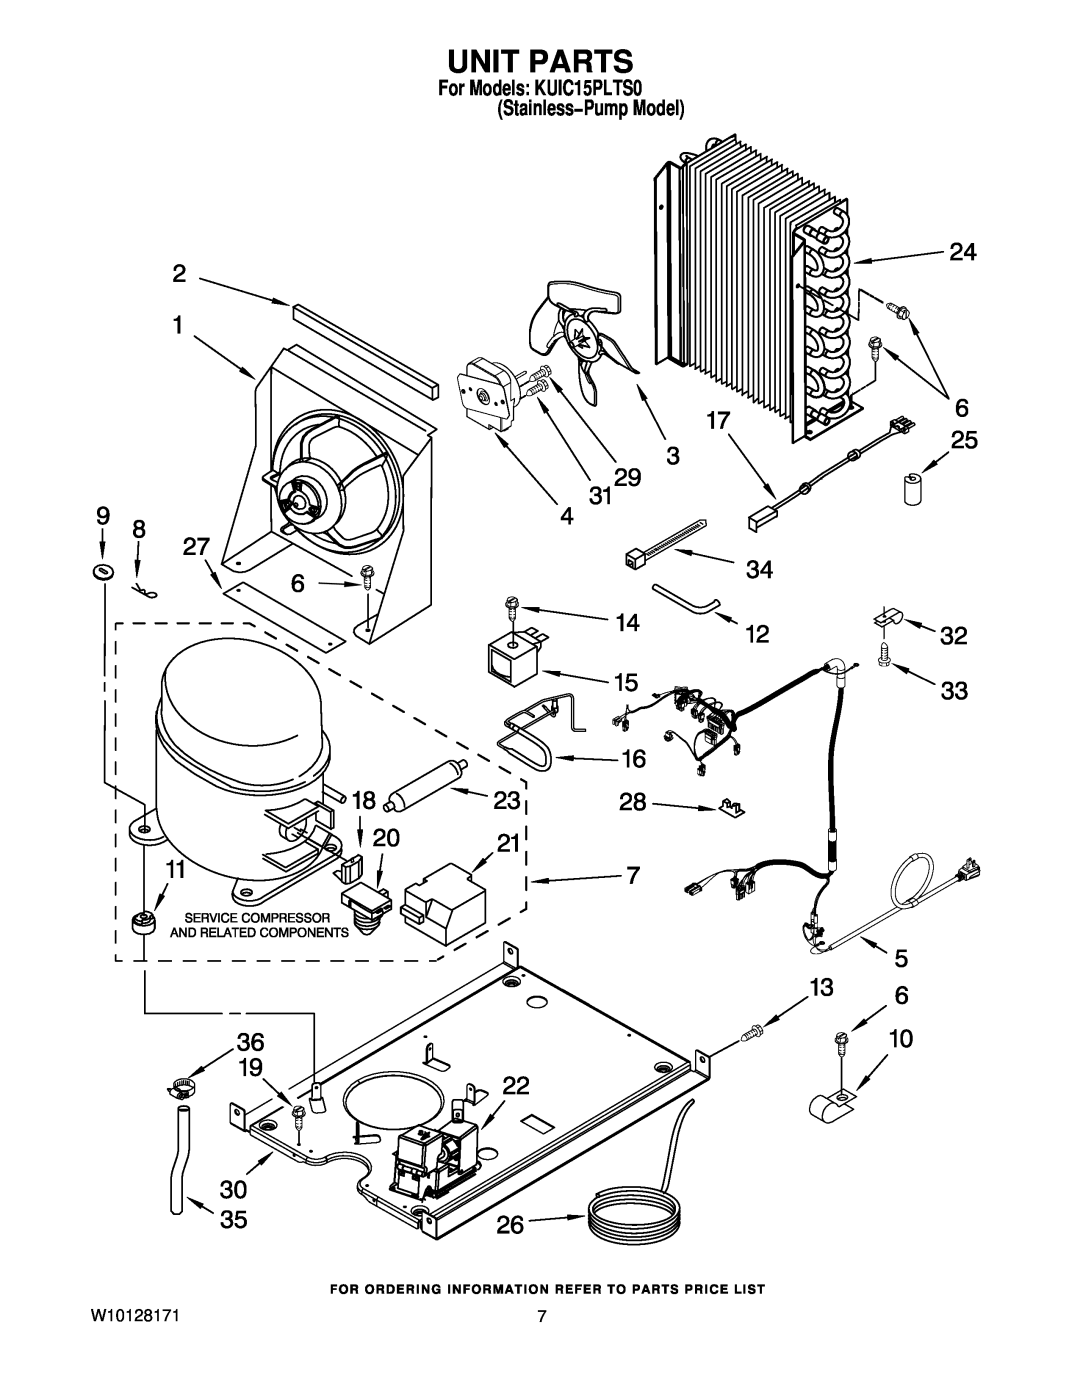 KitchenAid manual Unit Parts, W10128171, For Models KUIC15PLTS0 Stainless−Pump Model 